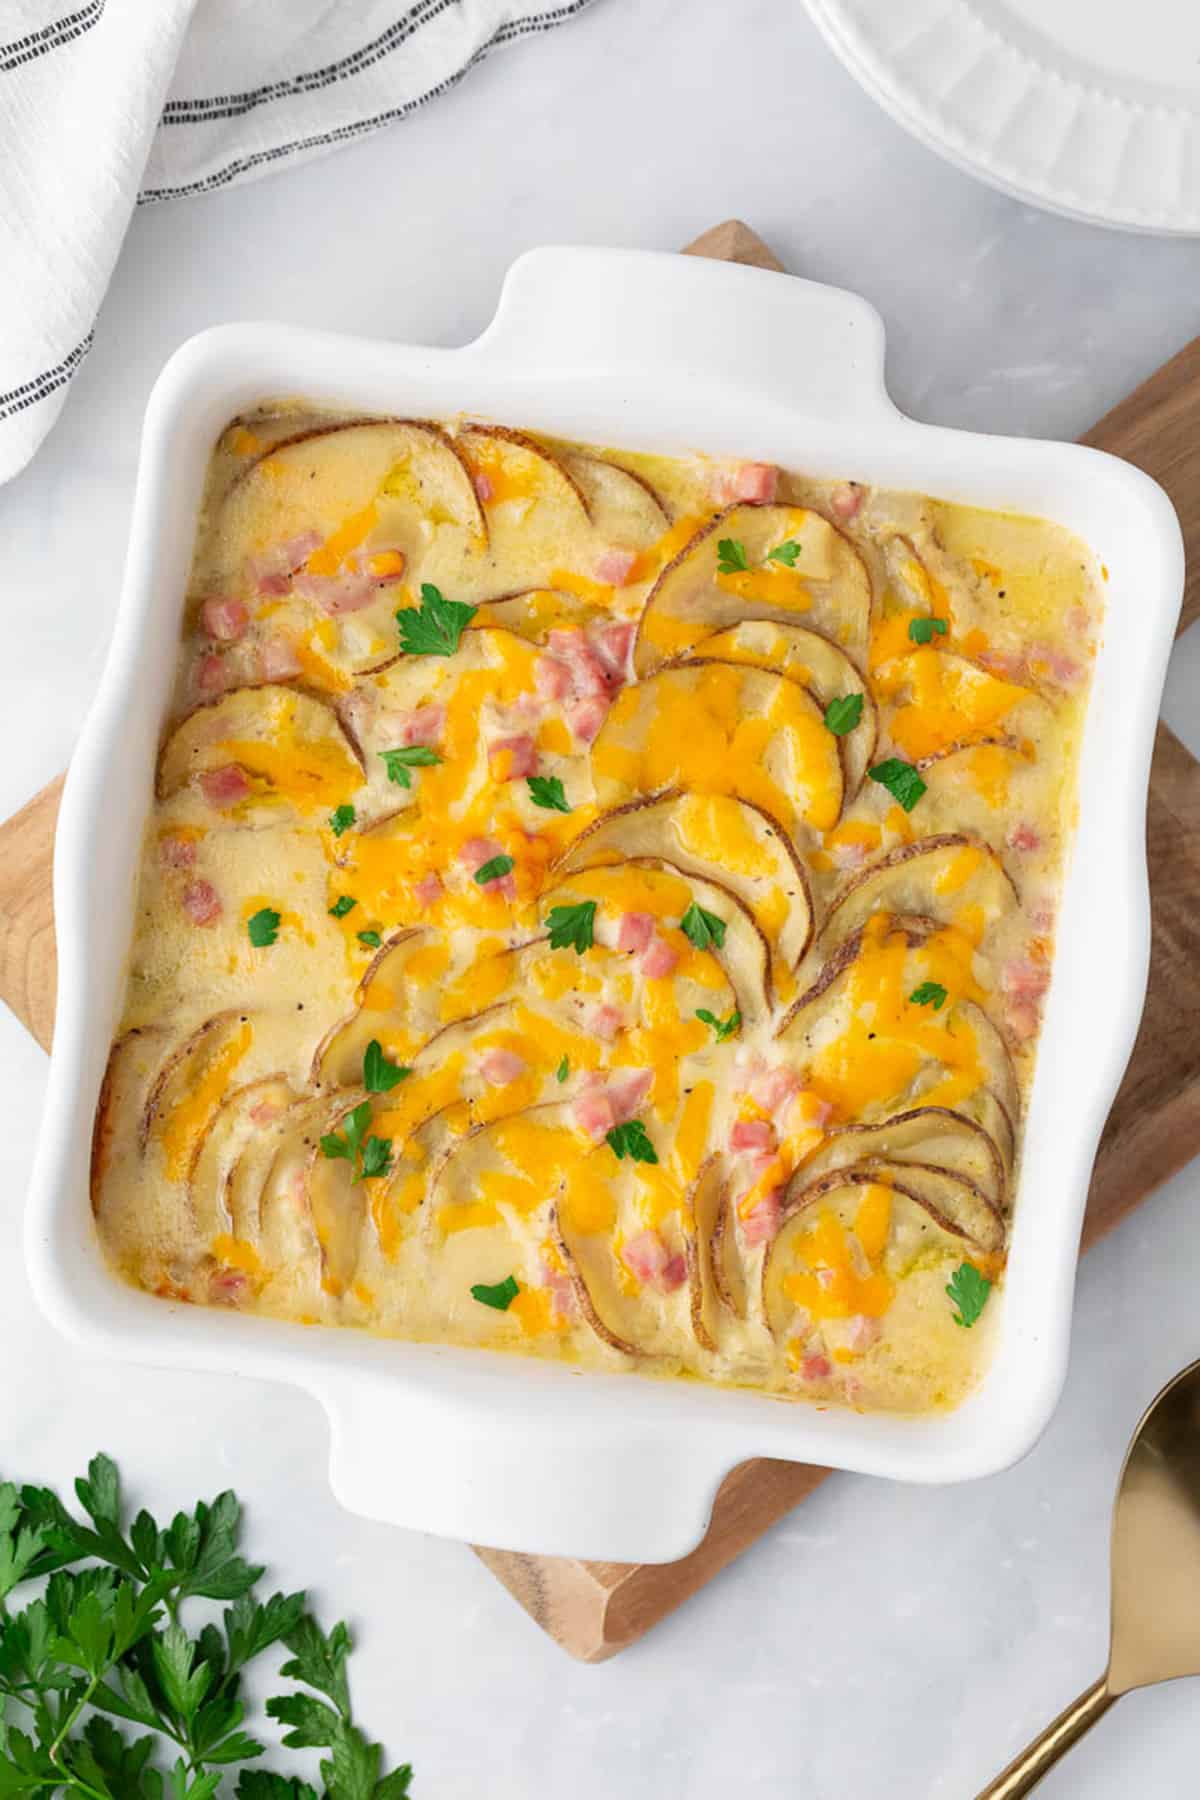 Scalloped potatoes and ham in baking dish.